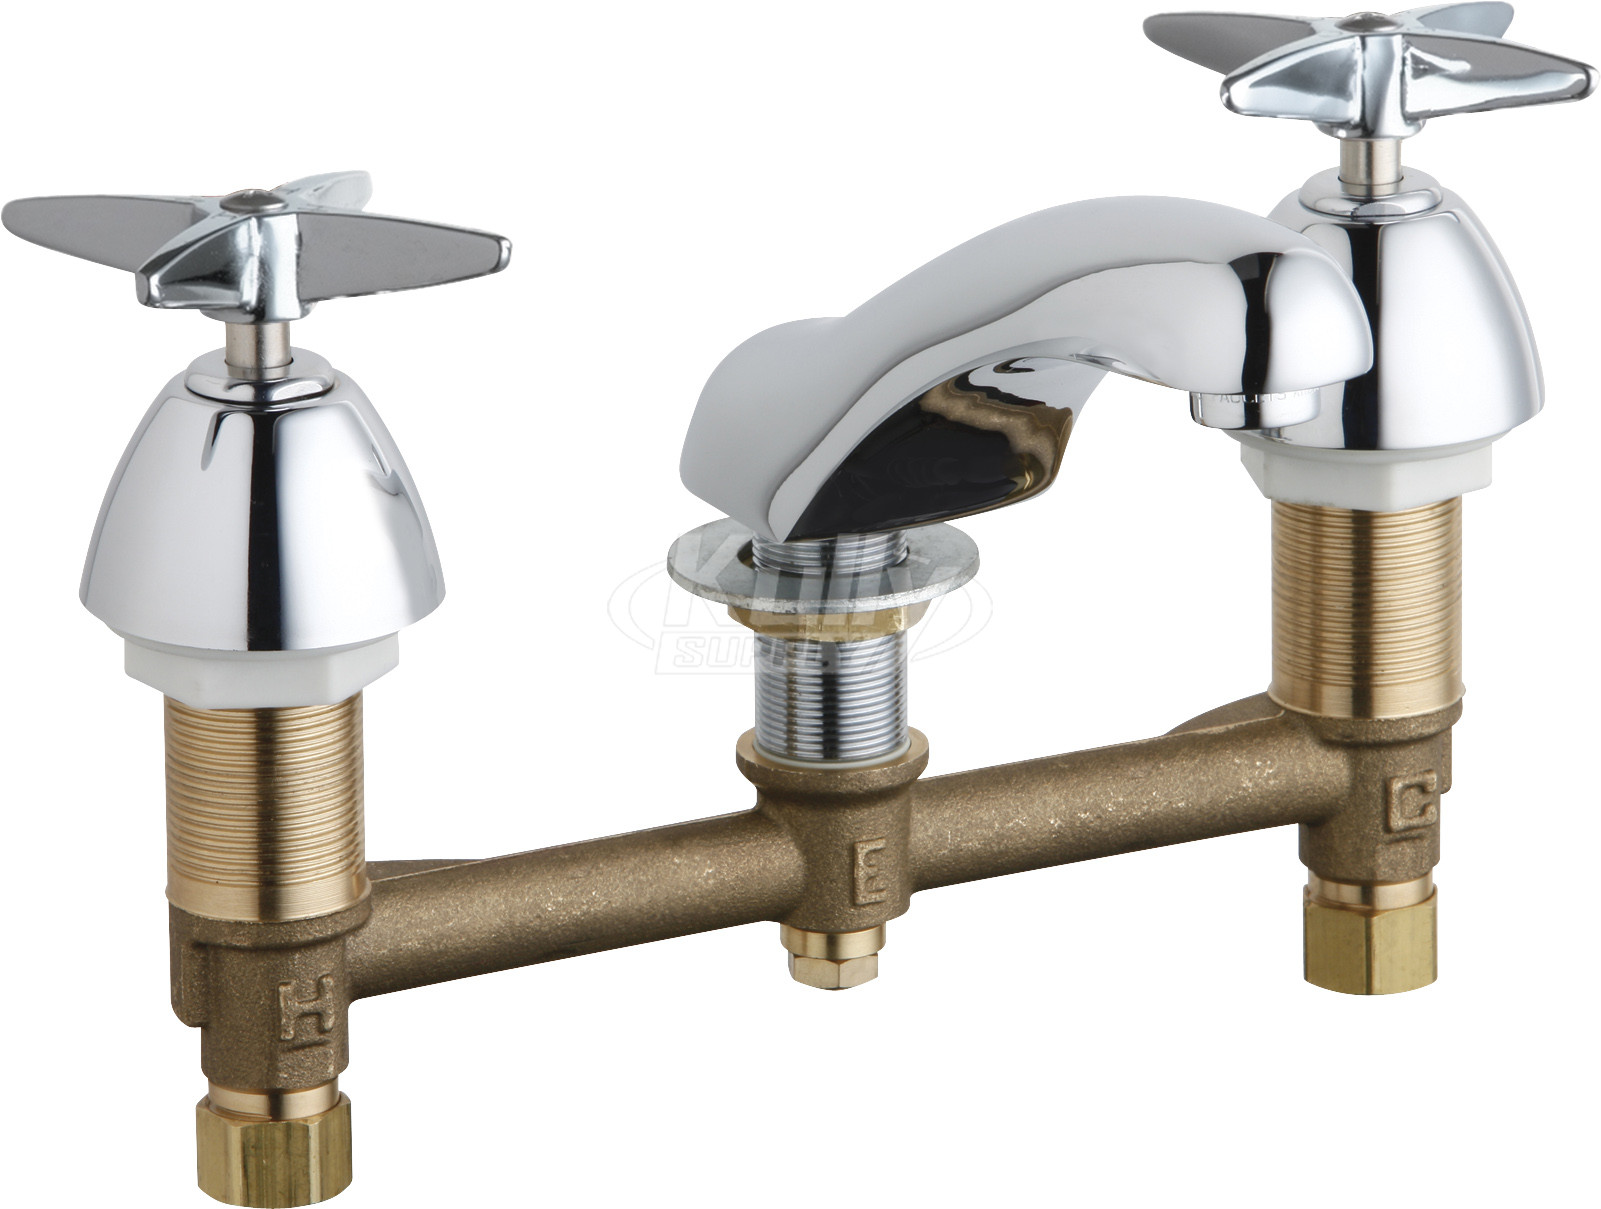 Chicago 404-633ABCP Concealed Hot and Cold Water Sink Faucet